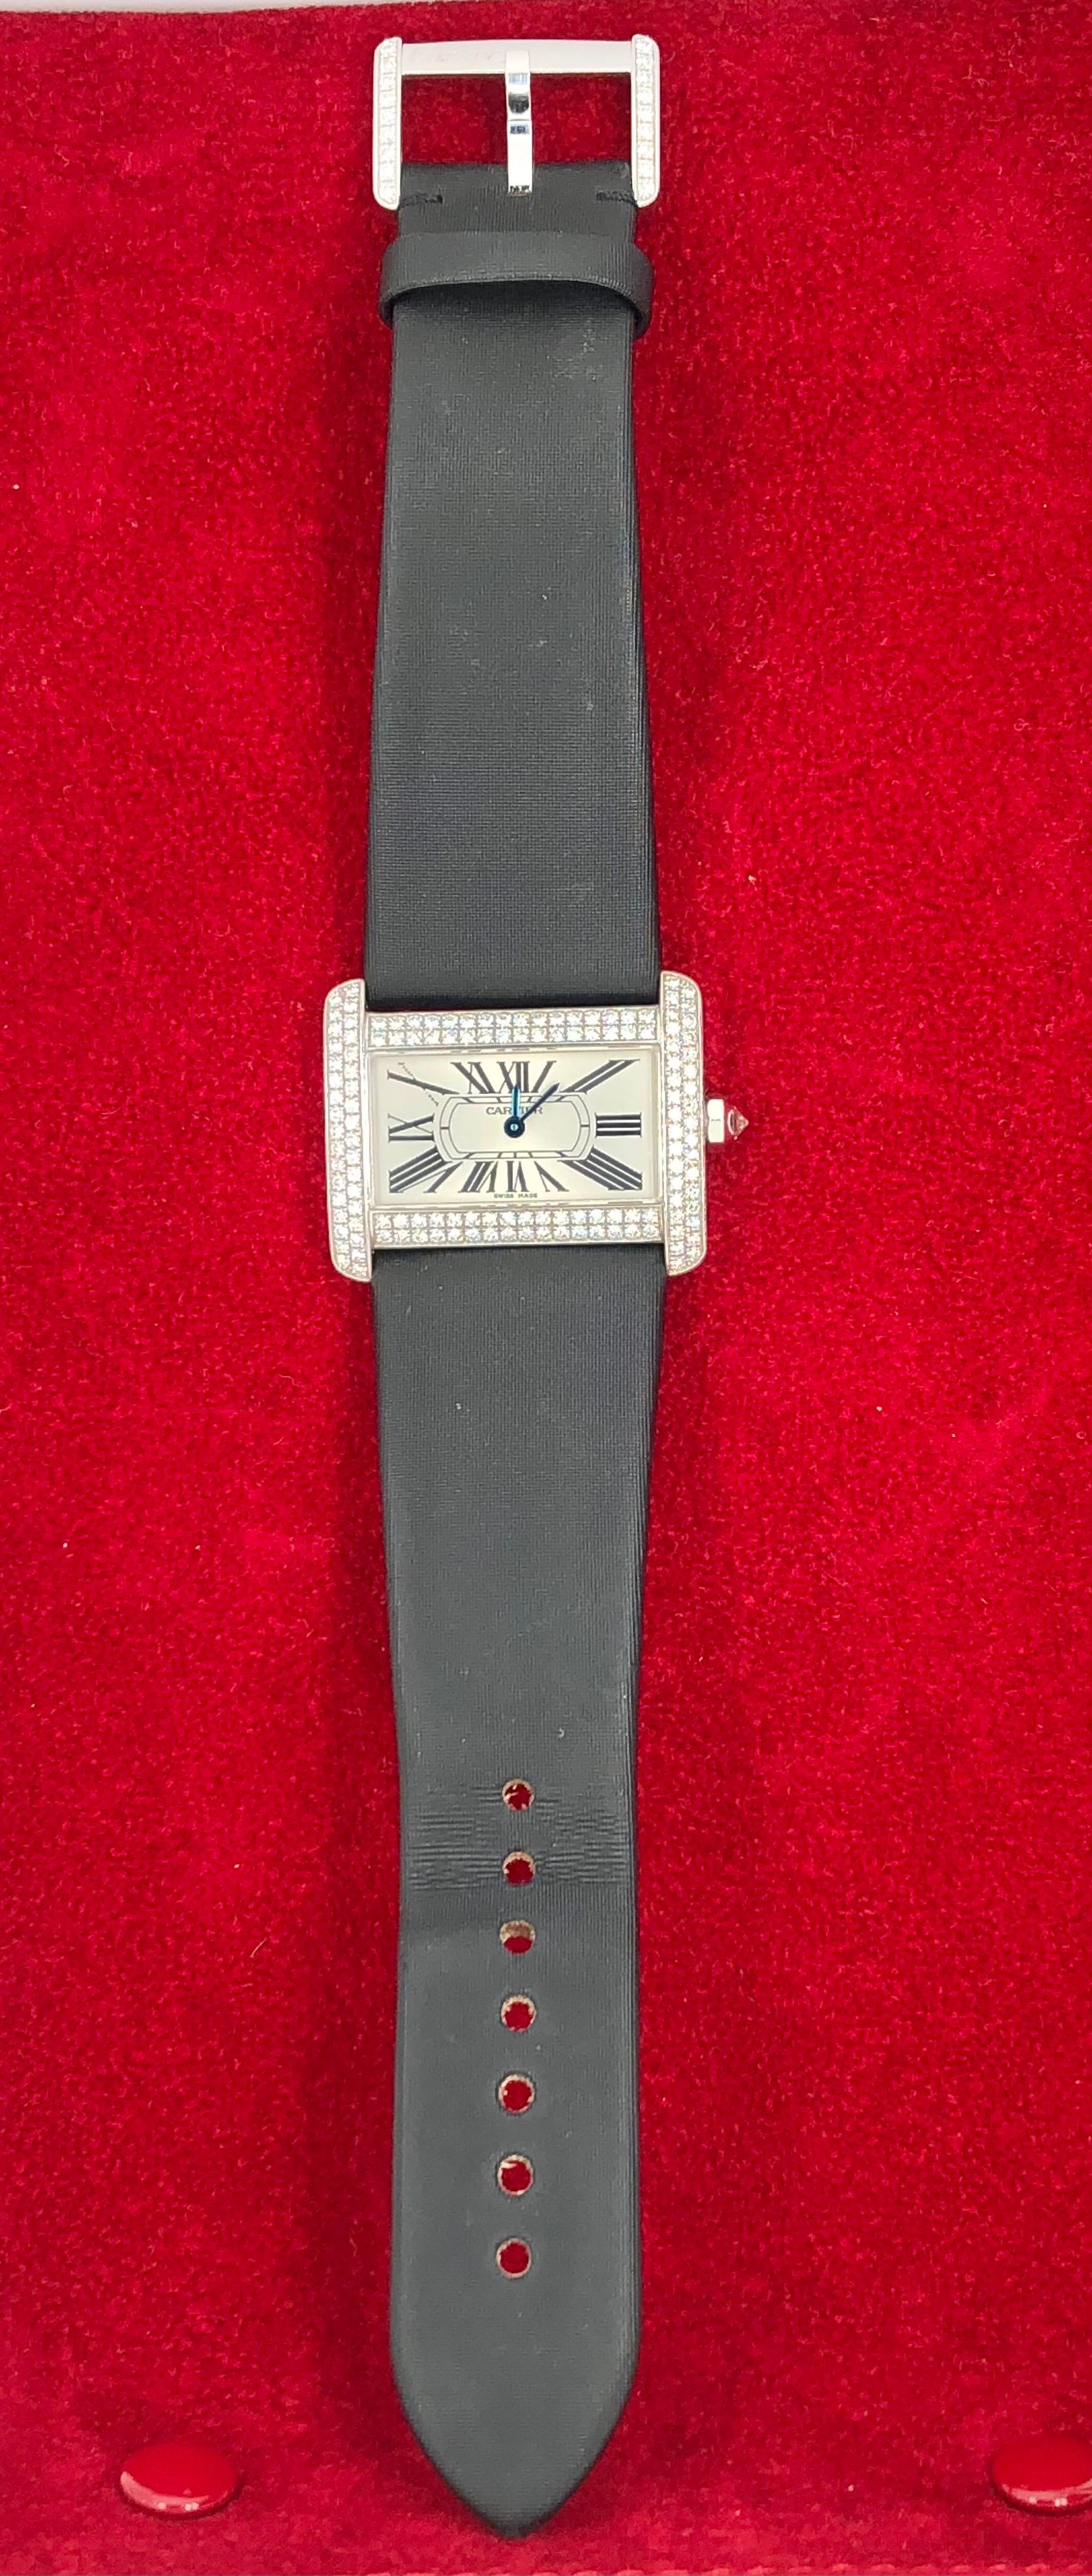 Cartier 18 Karat White Gold Mini Tank Divan Watch Diamond Paved Case In Good Condition For Sale In Stamford, CT